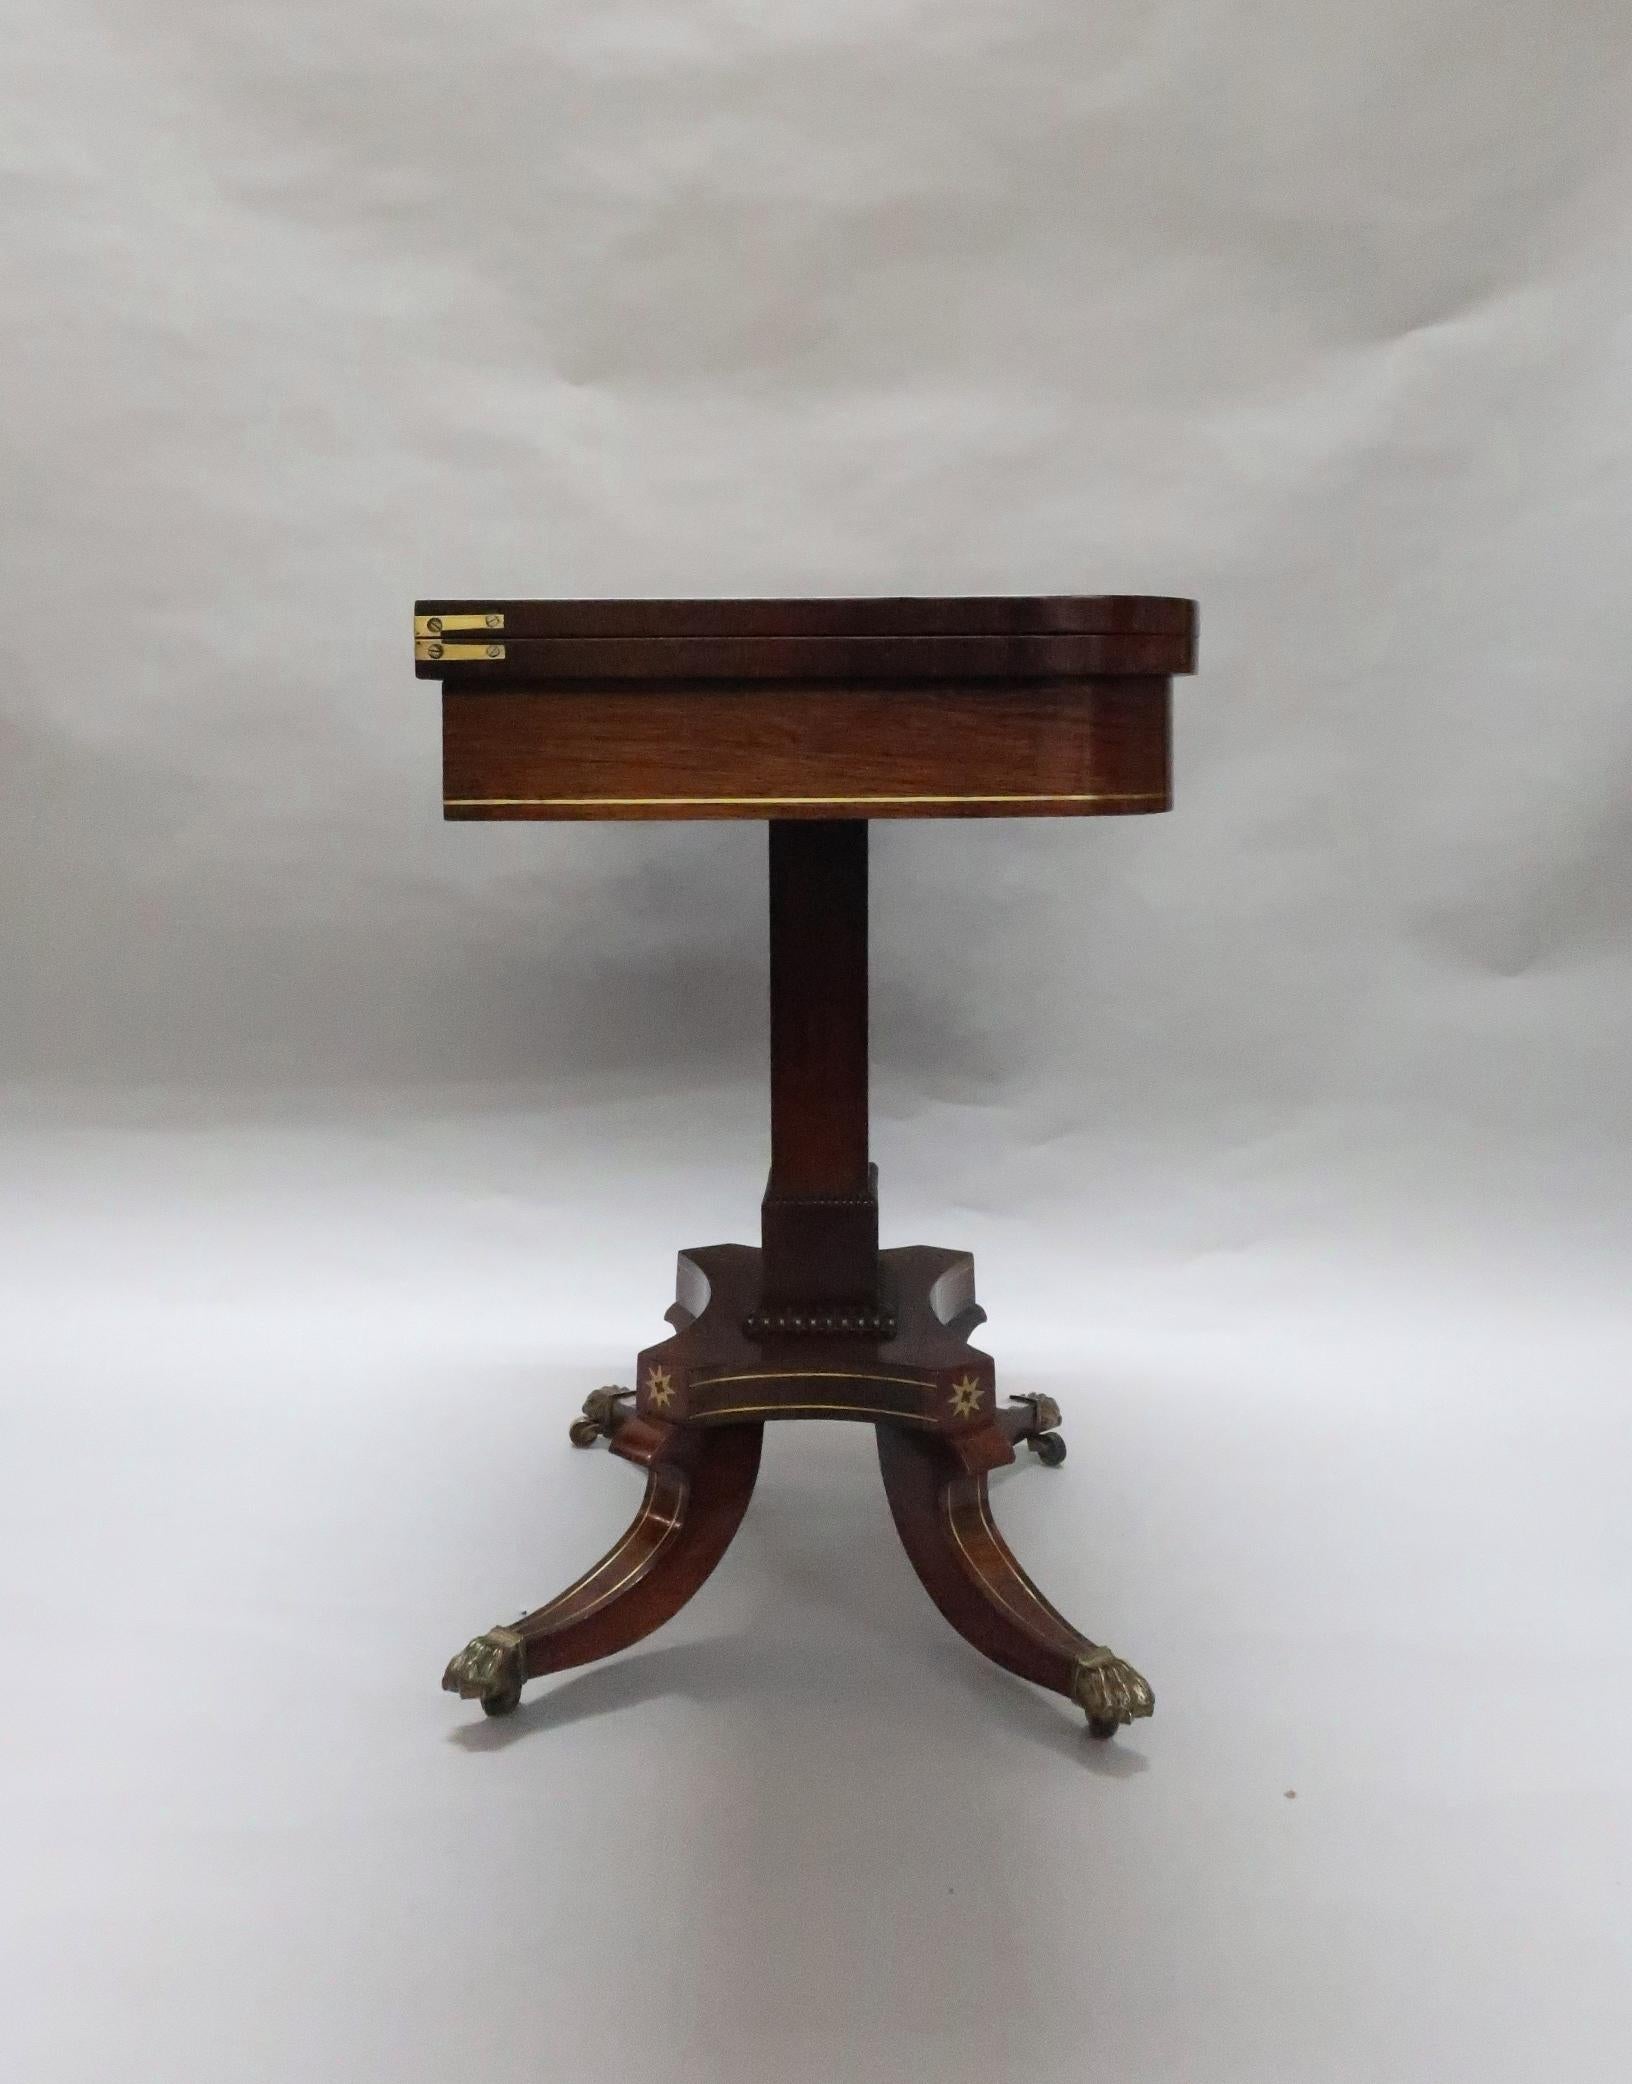 English Regency Rosewood and Brass Inlaid Side Table Attributed to John Mclean For Sale 2